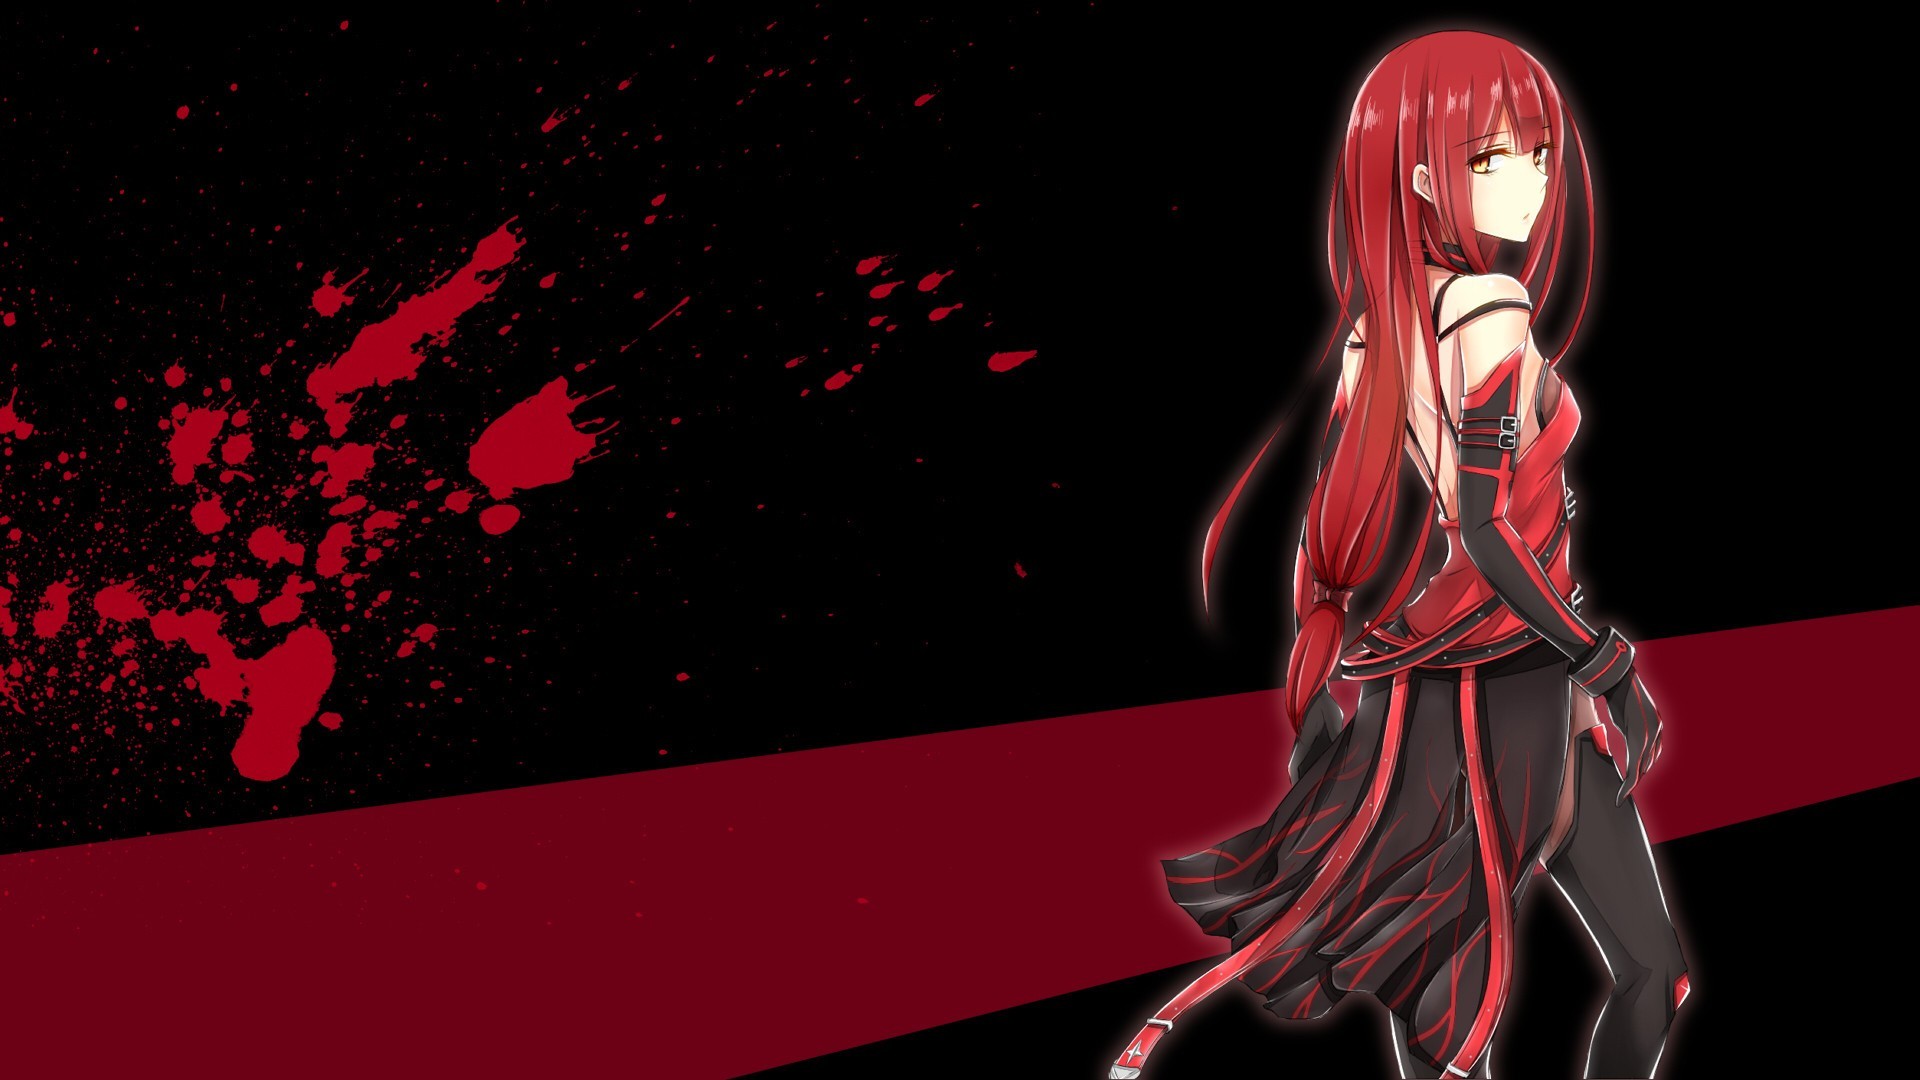 Red And Black Anime Wallpaper (72+ Images)